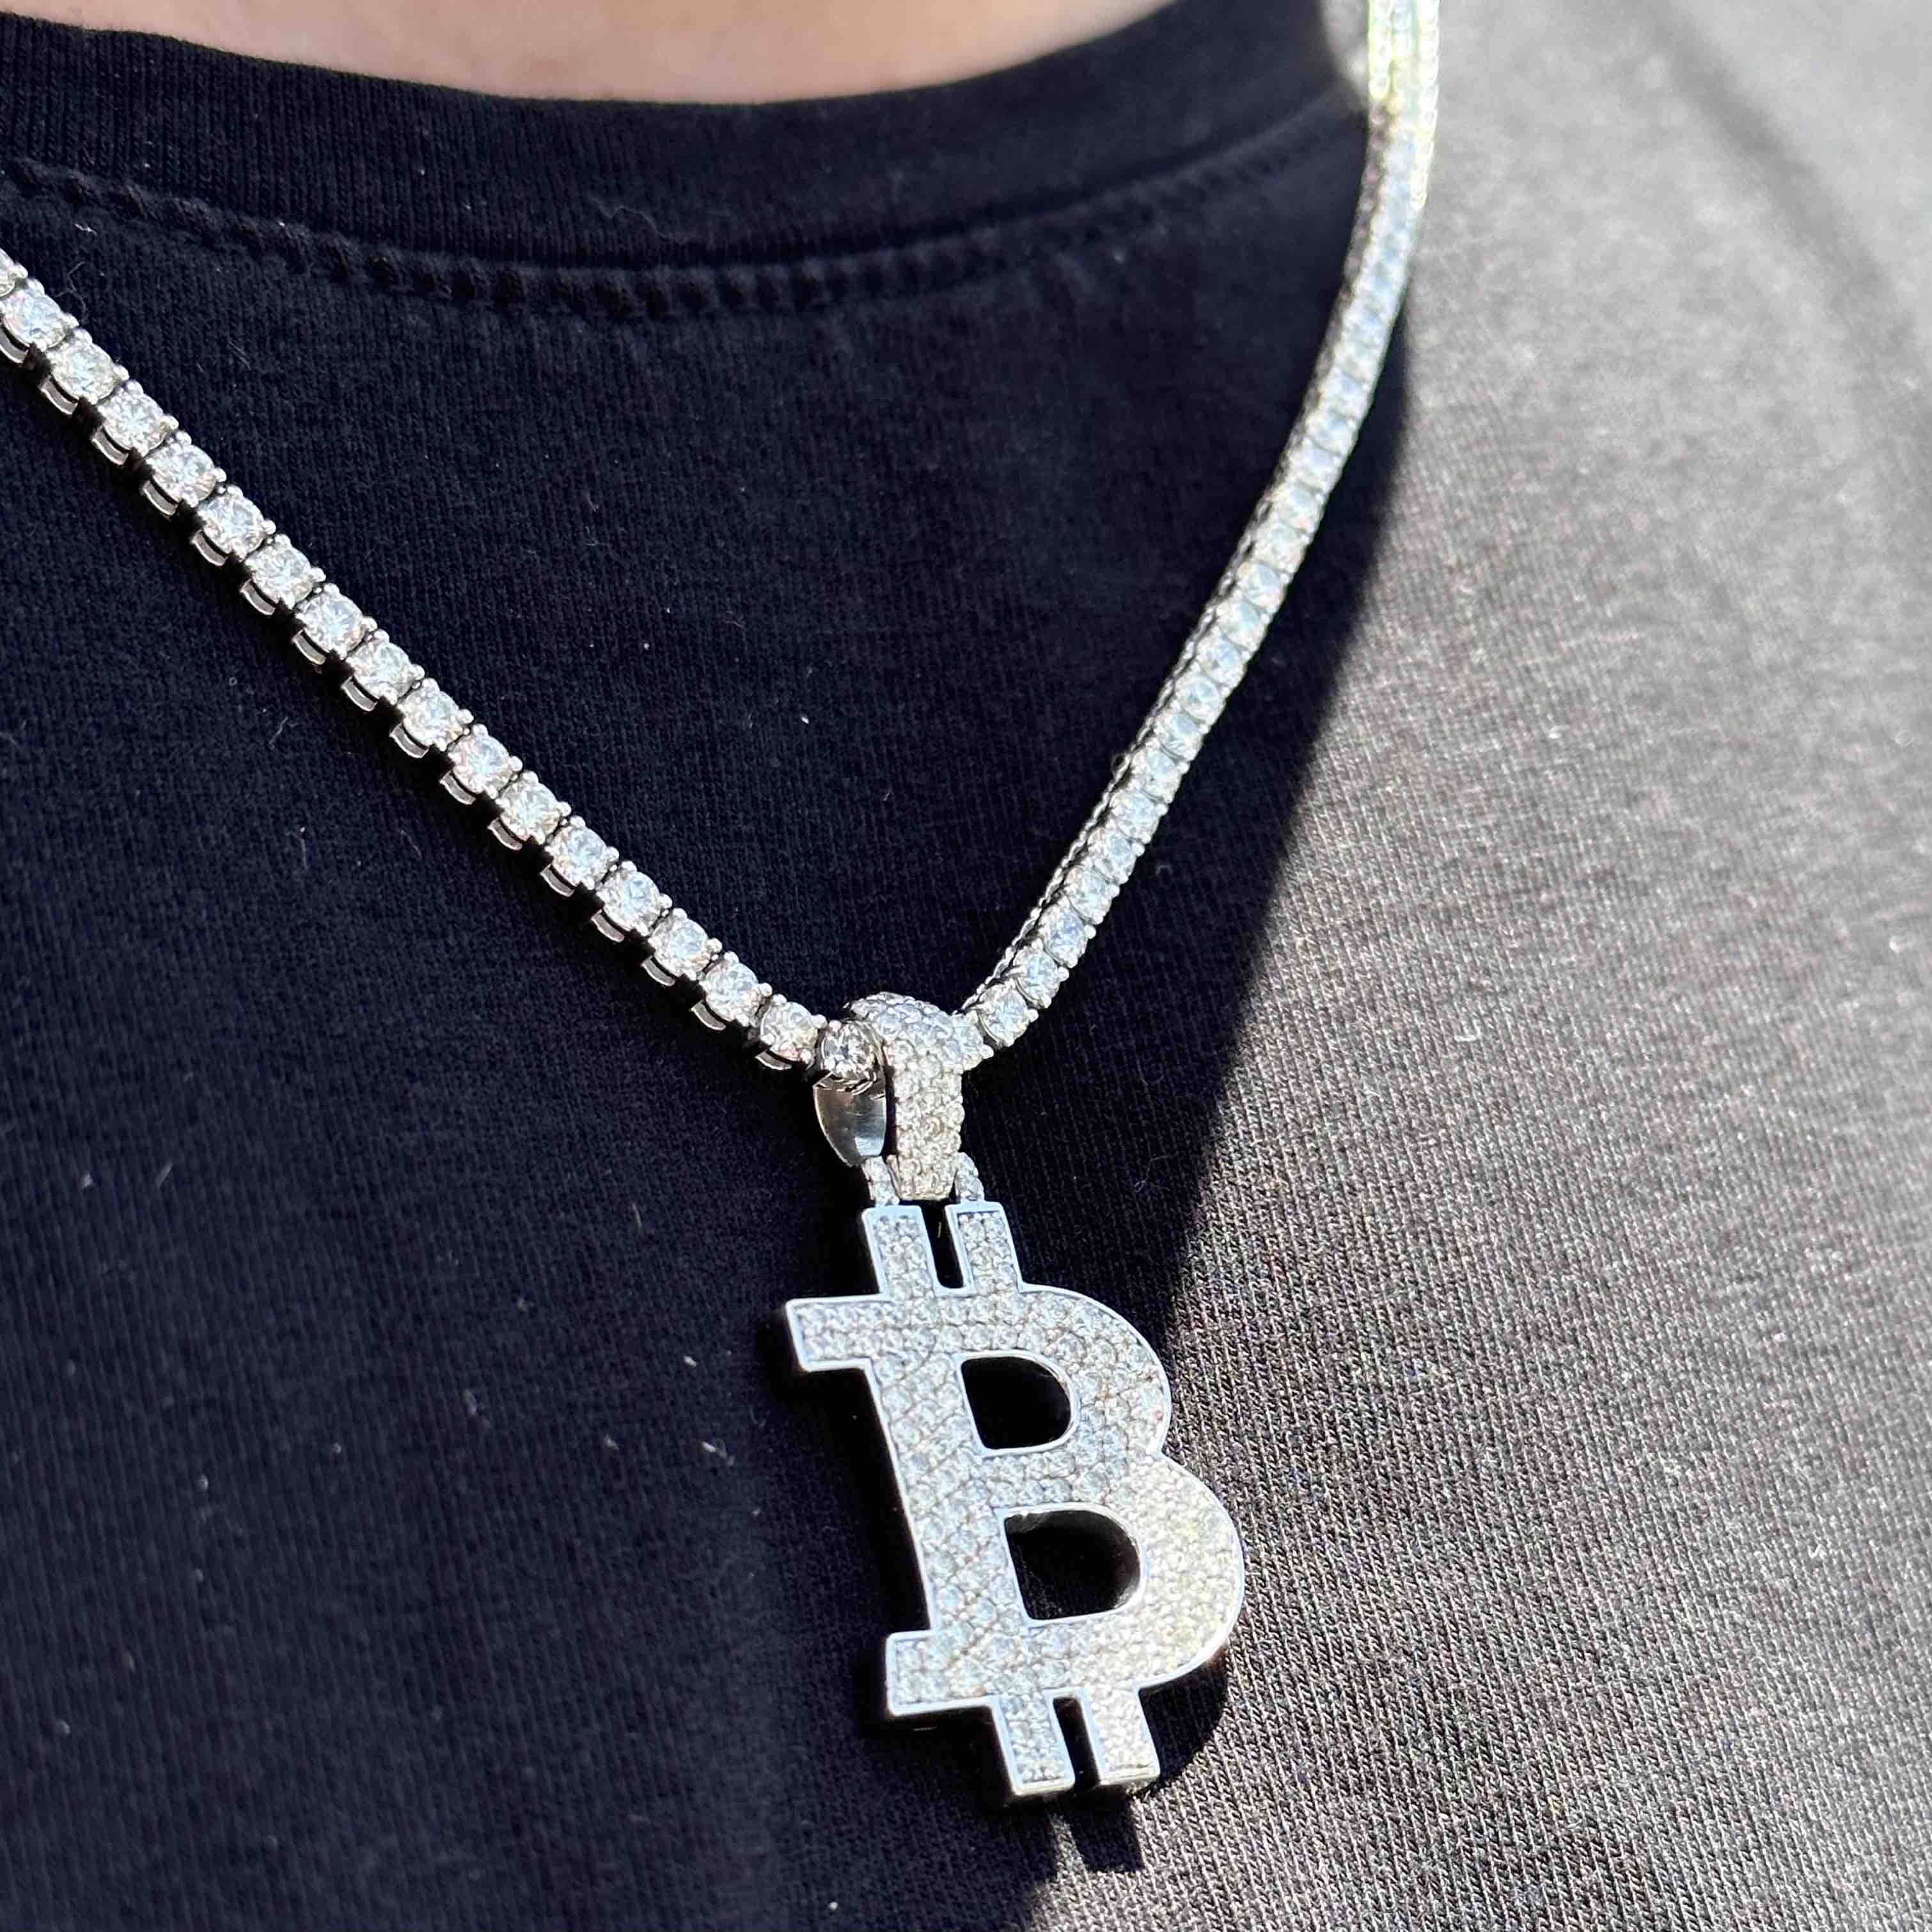 "iced out bitcoin chain"